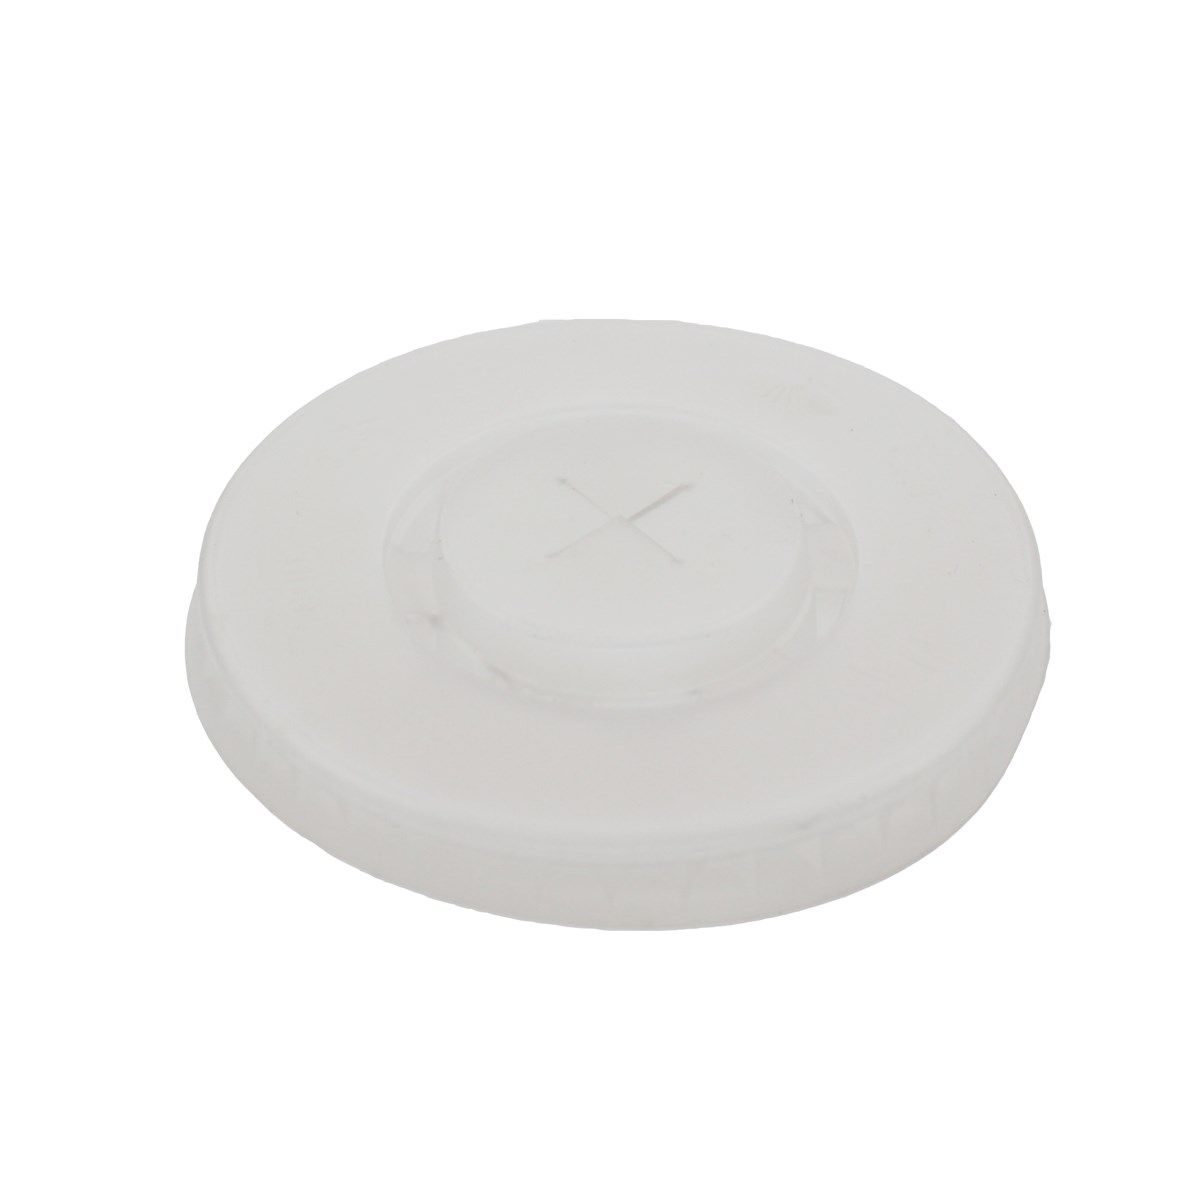 Transparent Plastic Cold Cup Lids With Straw Slot